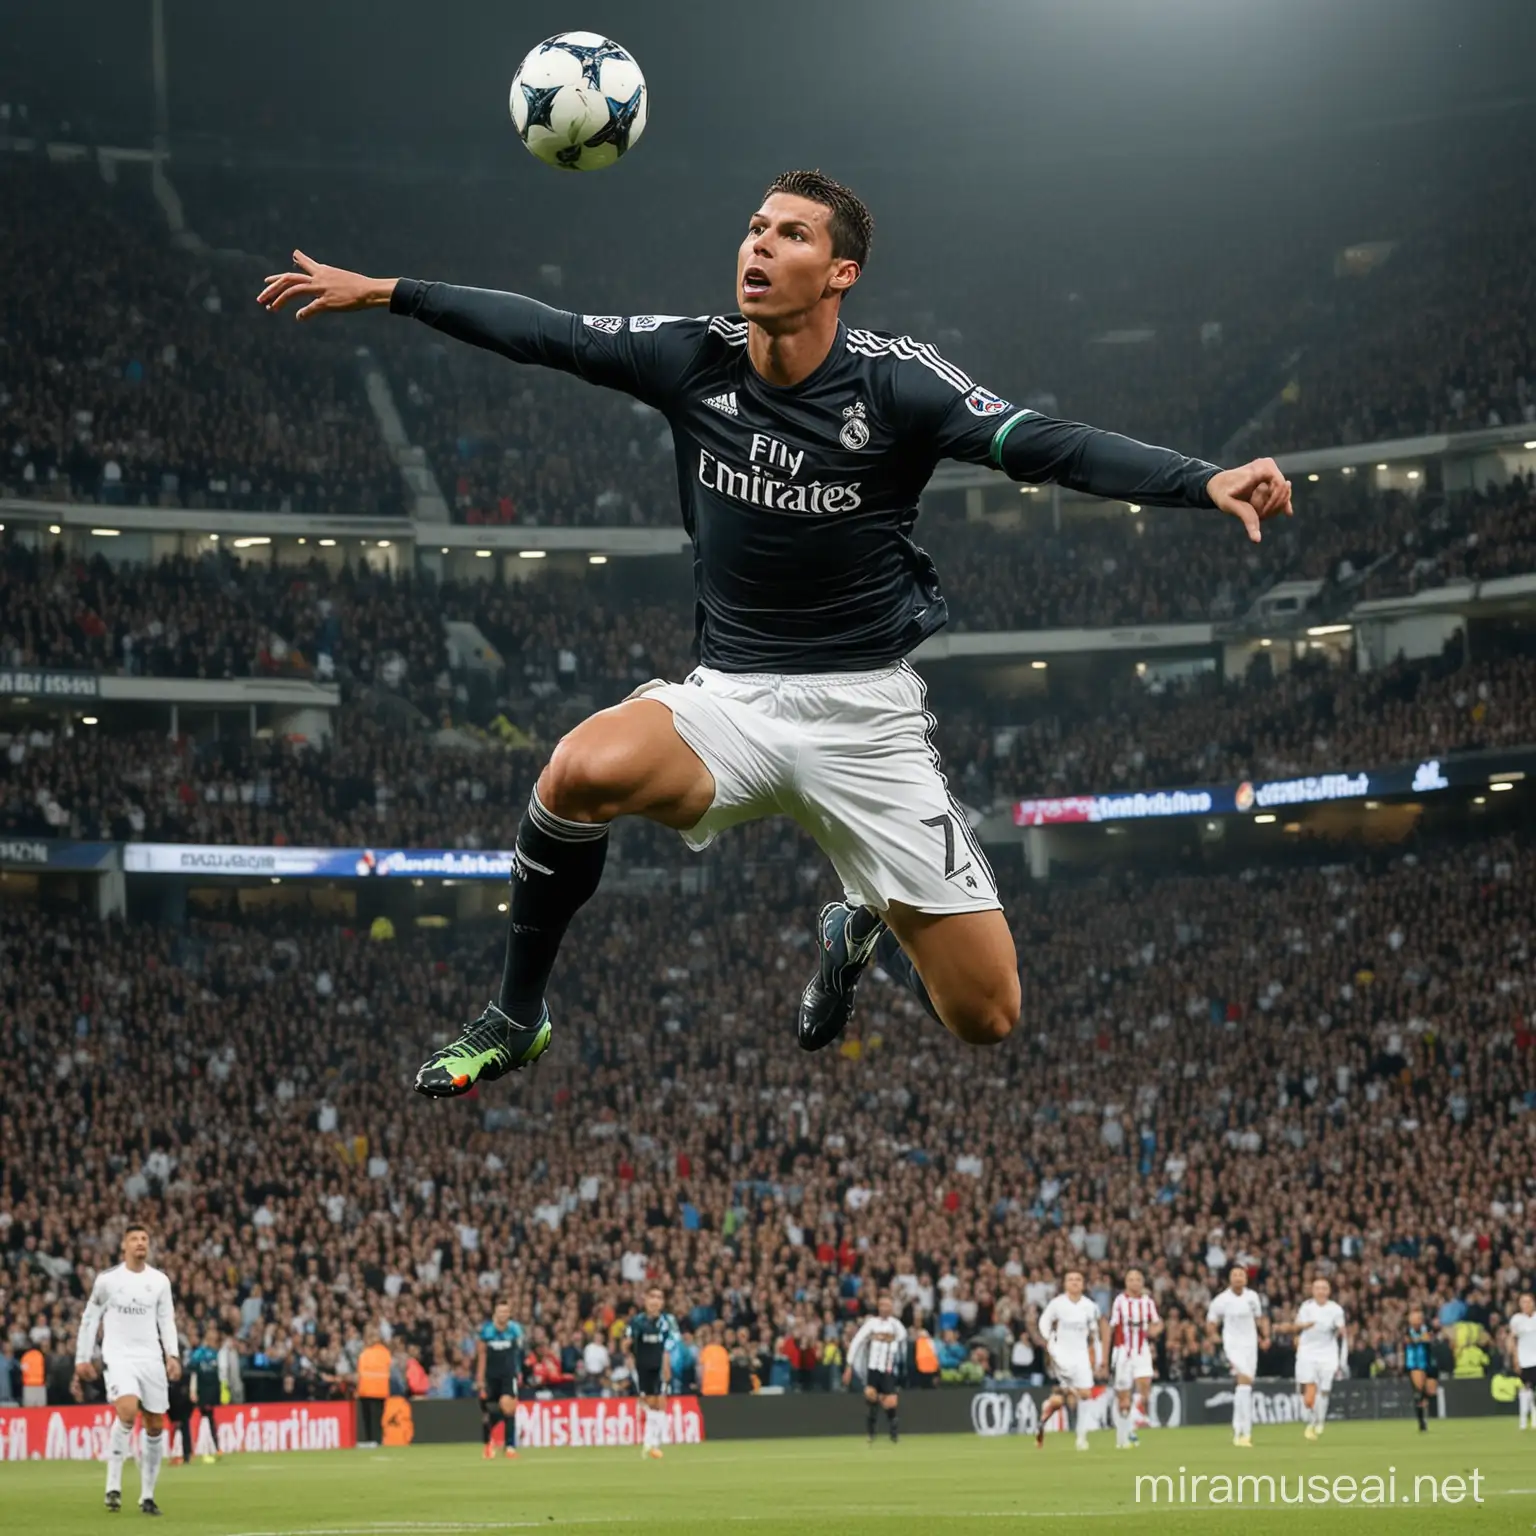 "Heading for glory! Pose mid-air as if you're going for a header, embodying Cristiano Ronaldo's aerial dominance."
with audience in ground